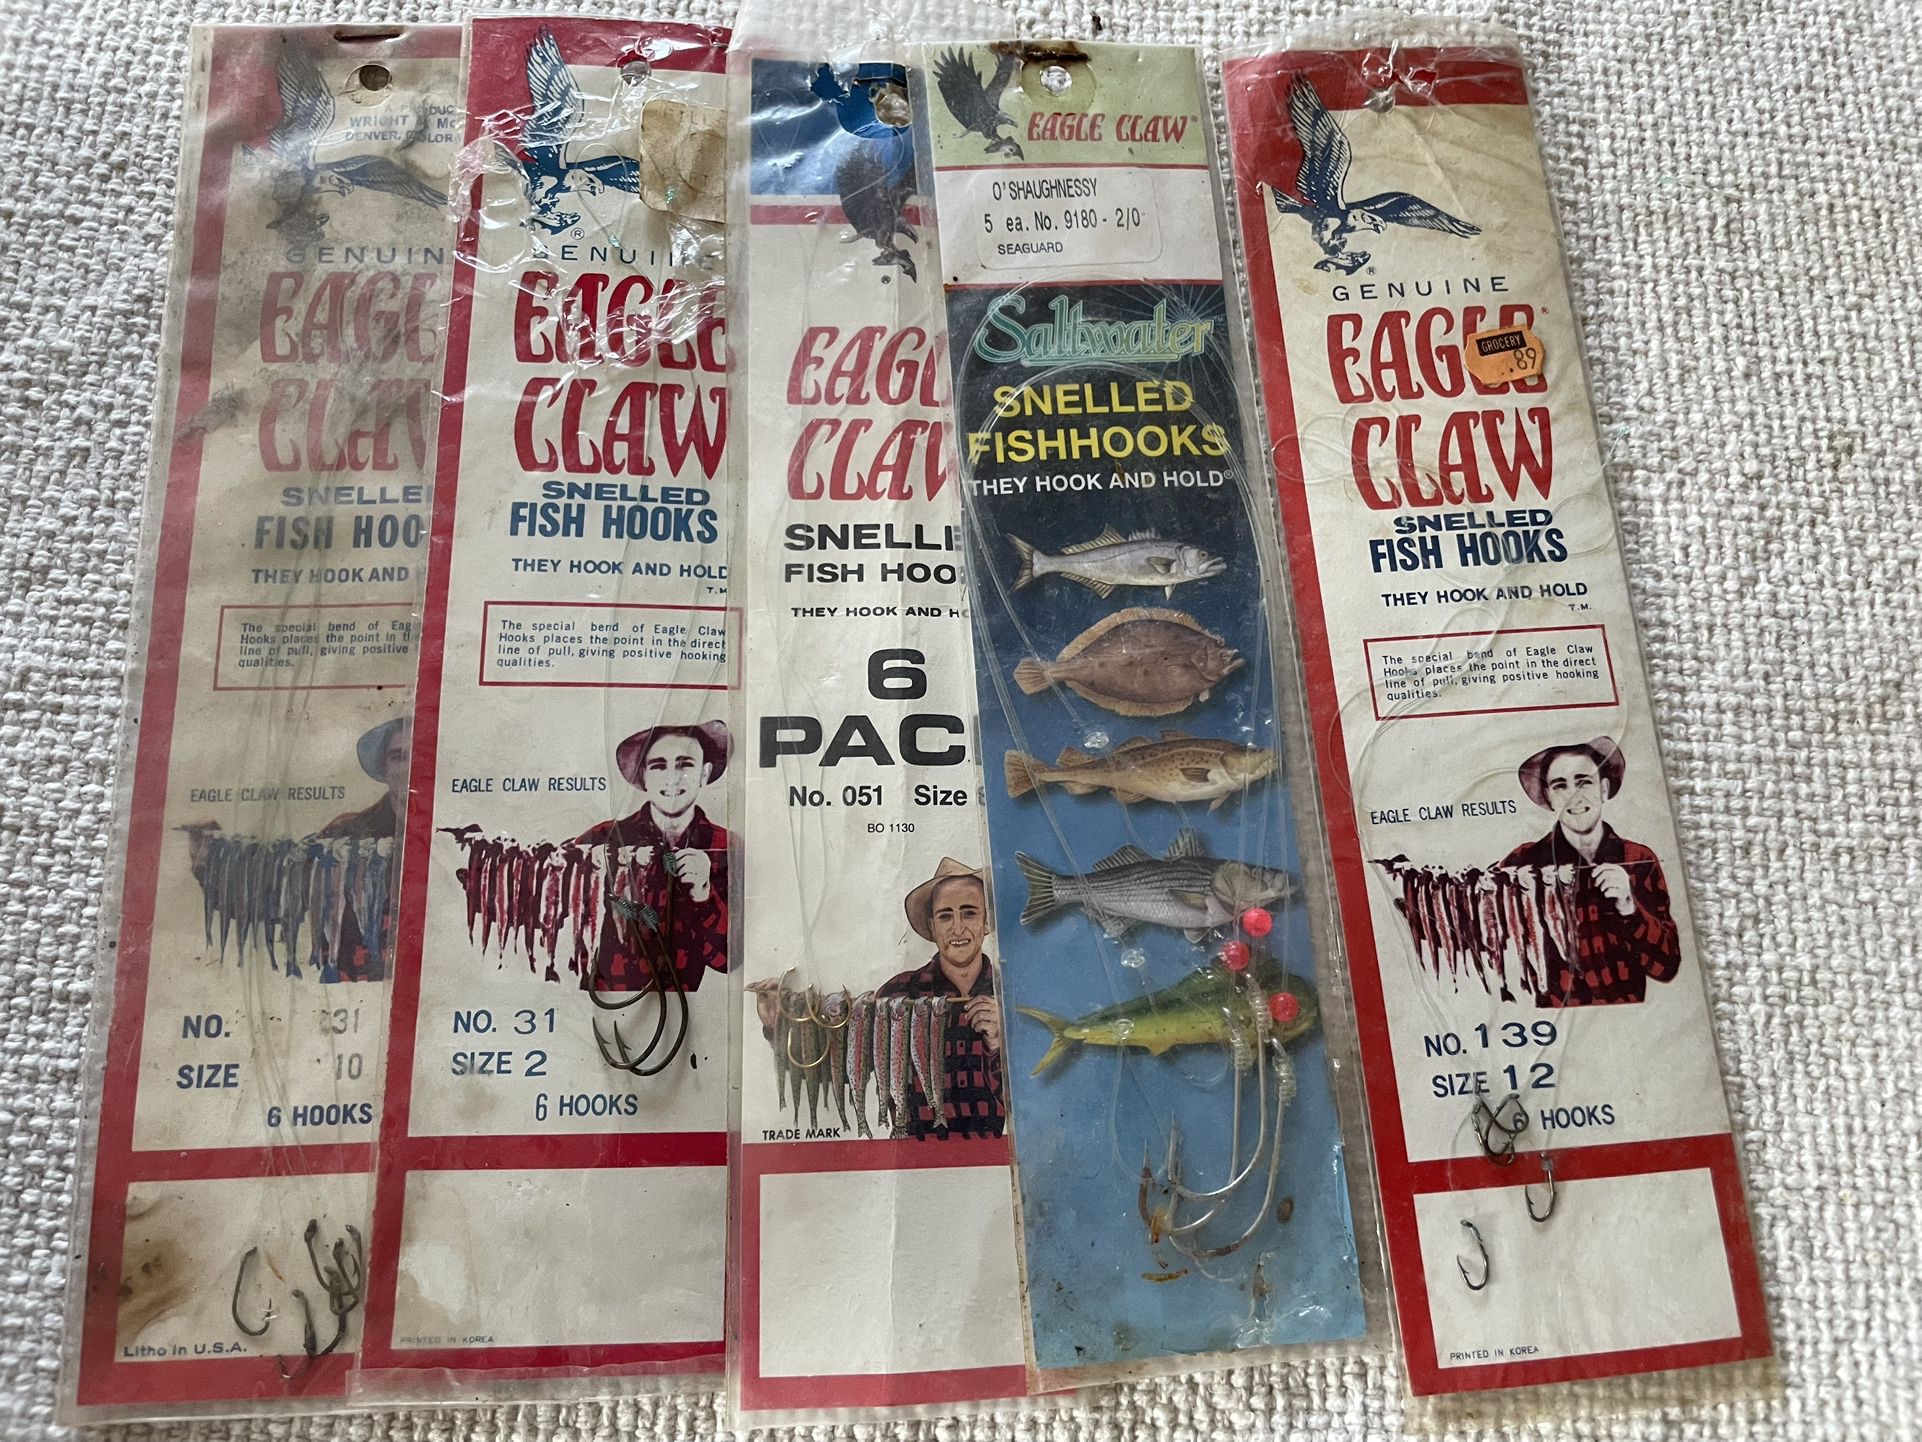 Vintage Eagle Claw Fishing Hooks - 16 Packages for Sale in West Mifflin, PA  - OfferUp